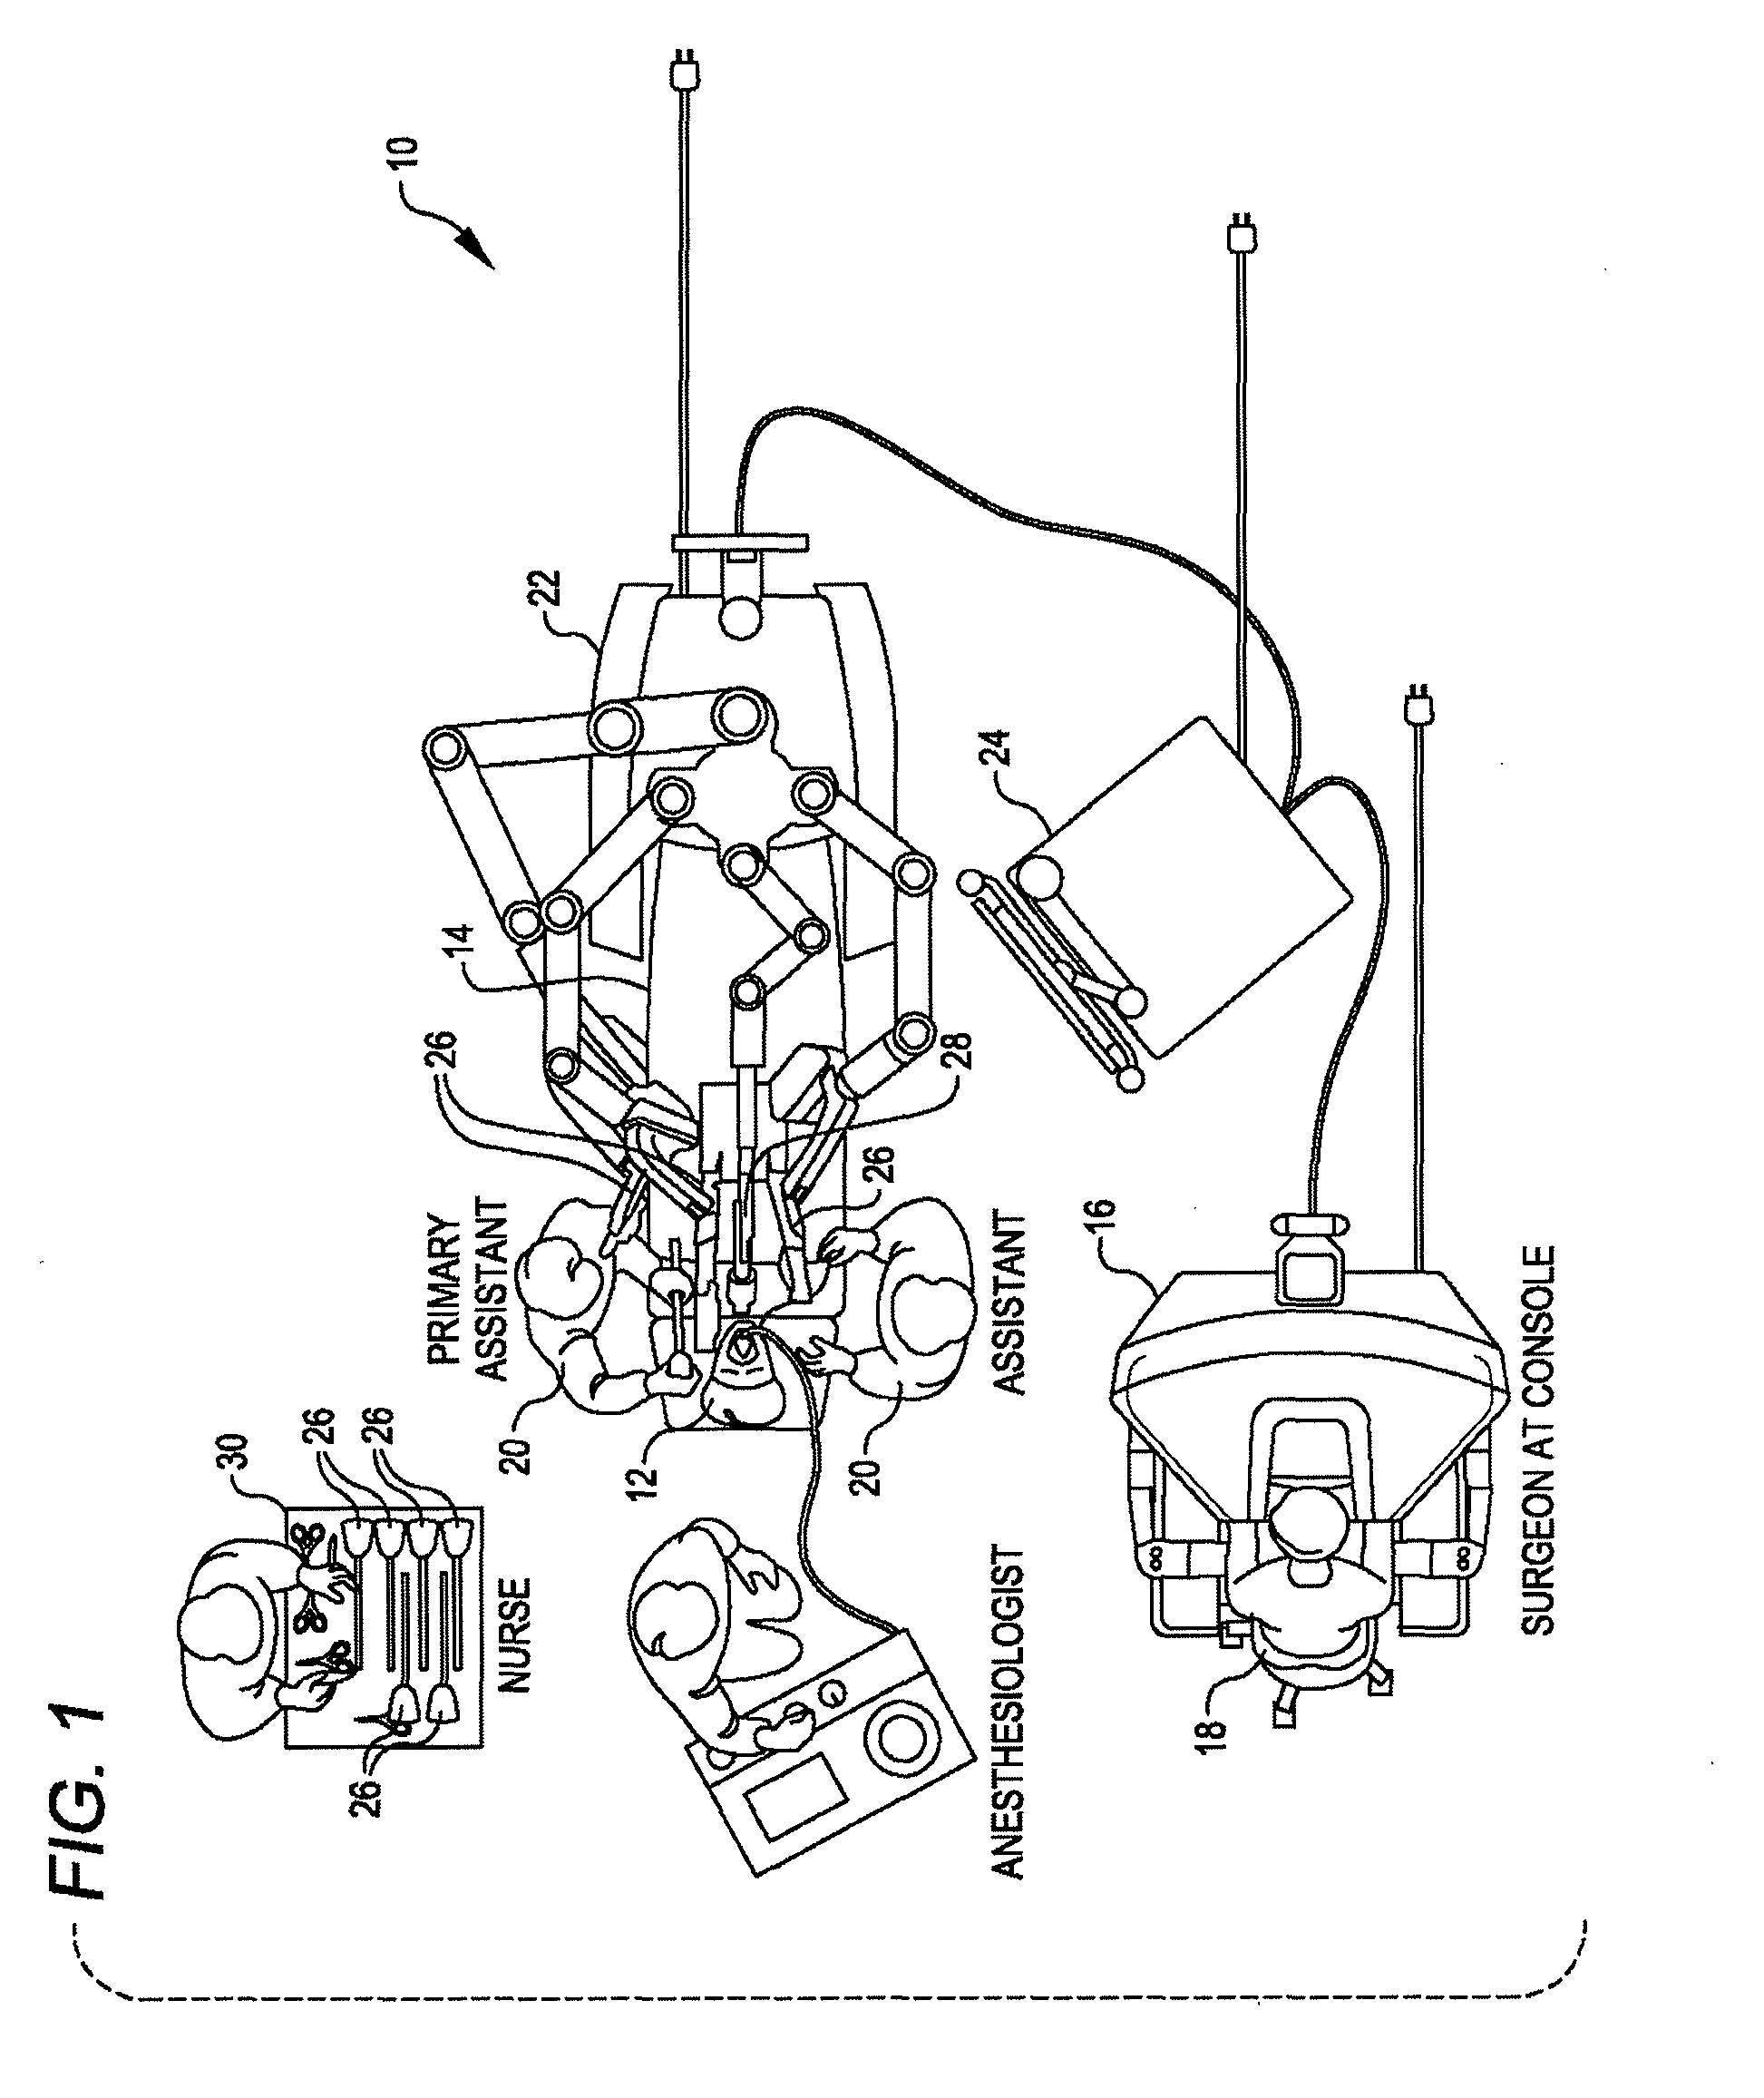 Decoupling instrument shaft roll and end effector actuation in a surgical instrument